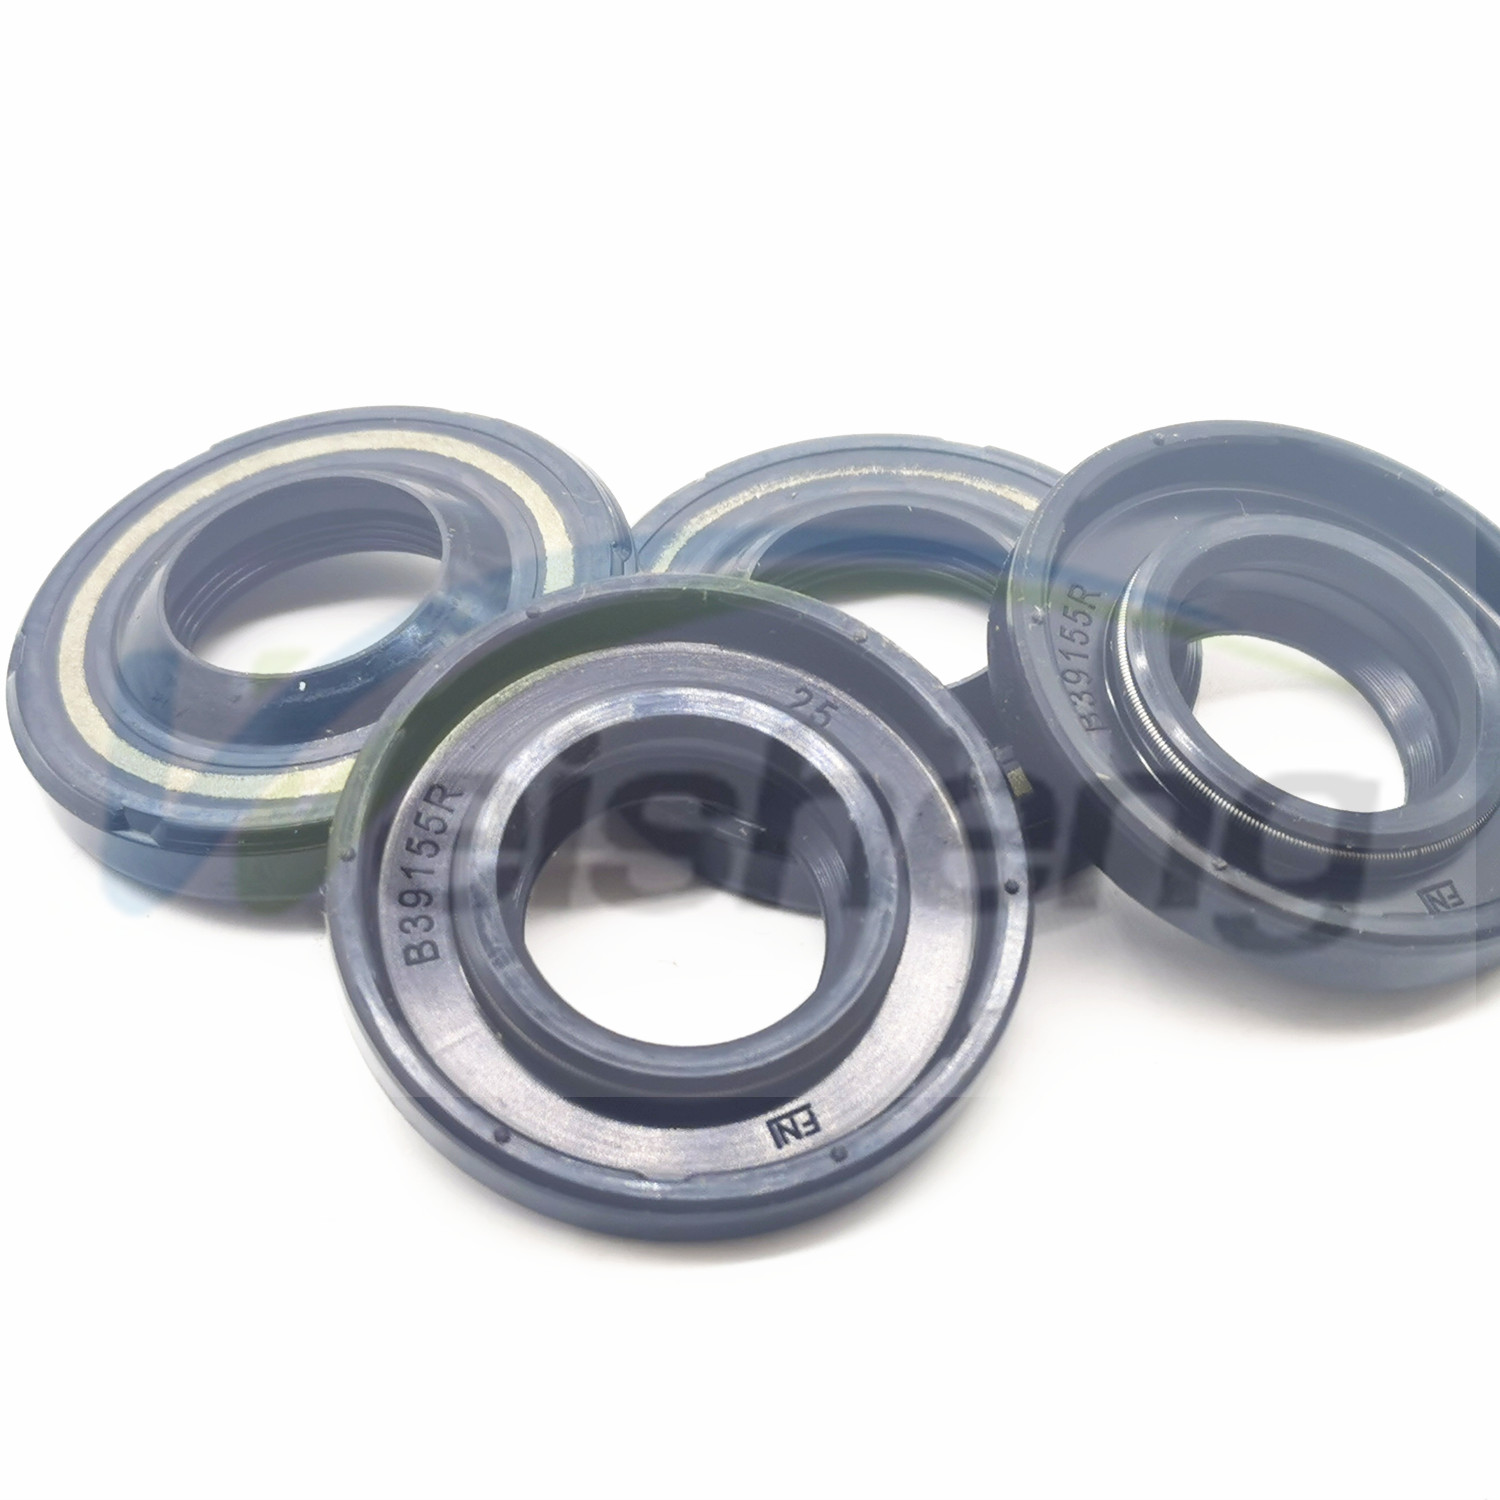 WS-SEALS 20.6*41.3*6.5/8 B39155R High Quality Power Steering Oil Seal  